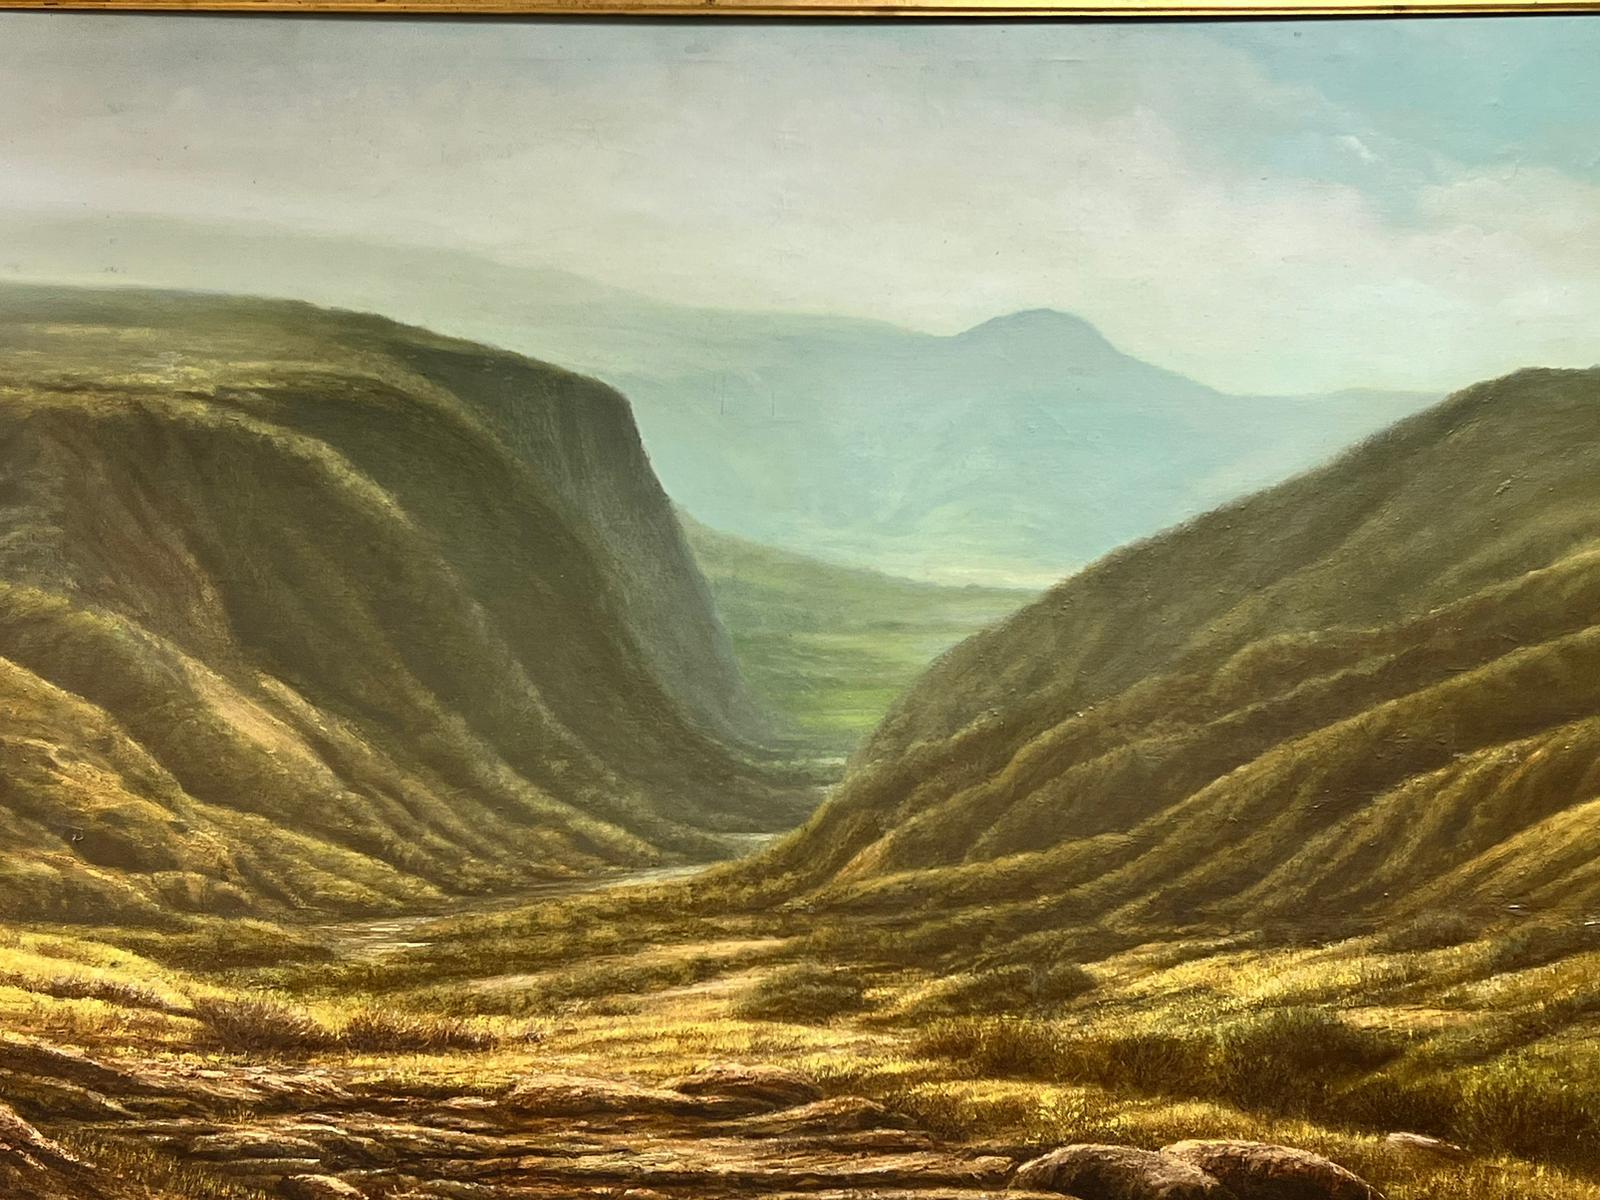 Artist/ School: French School, second half of the 20th century, signed

Title: Gorge valley landscape

Medium: oil on canvas, framed

Framed: 39 x 59 inches
Painting: 34 x 54 inches

Provenance: private collection, UK

Condition: The painting is in